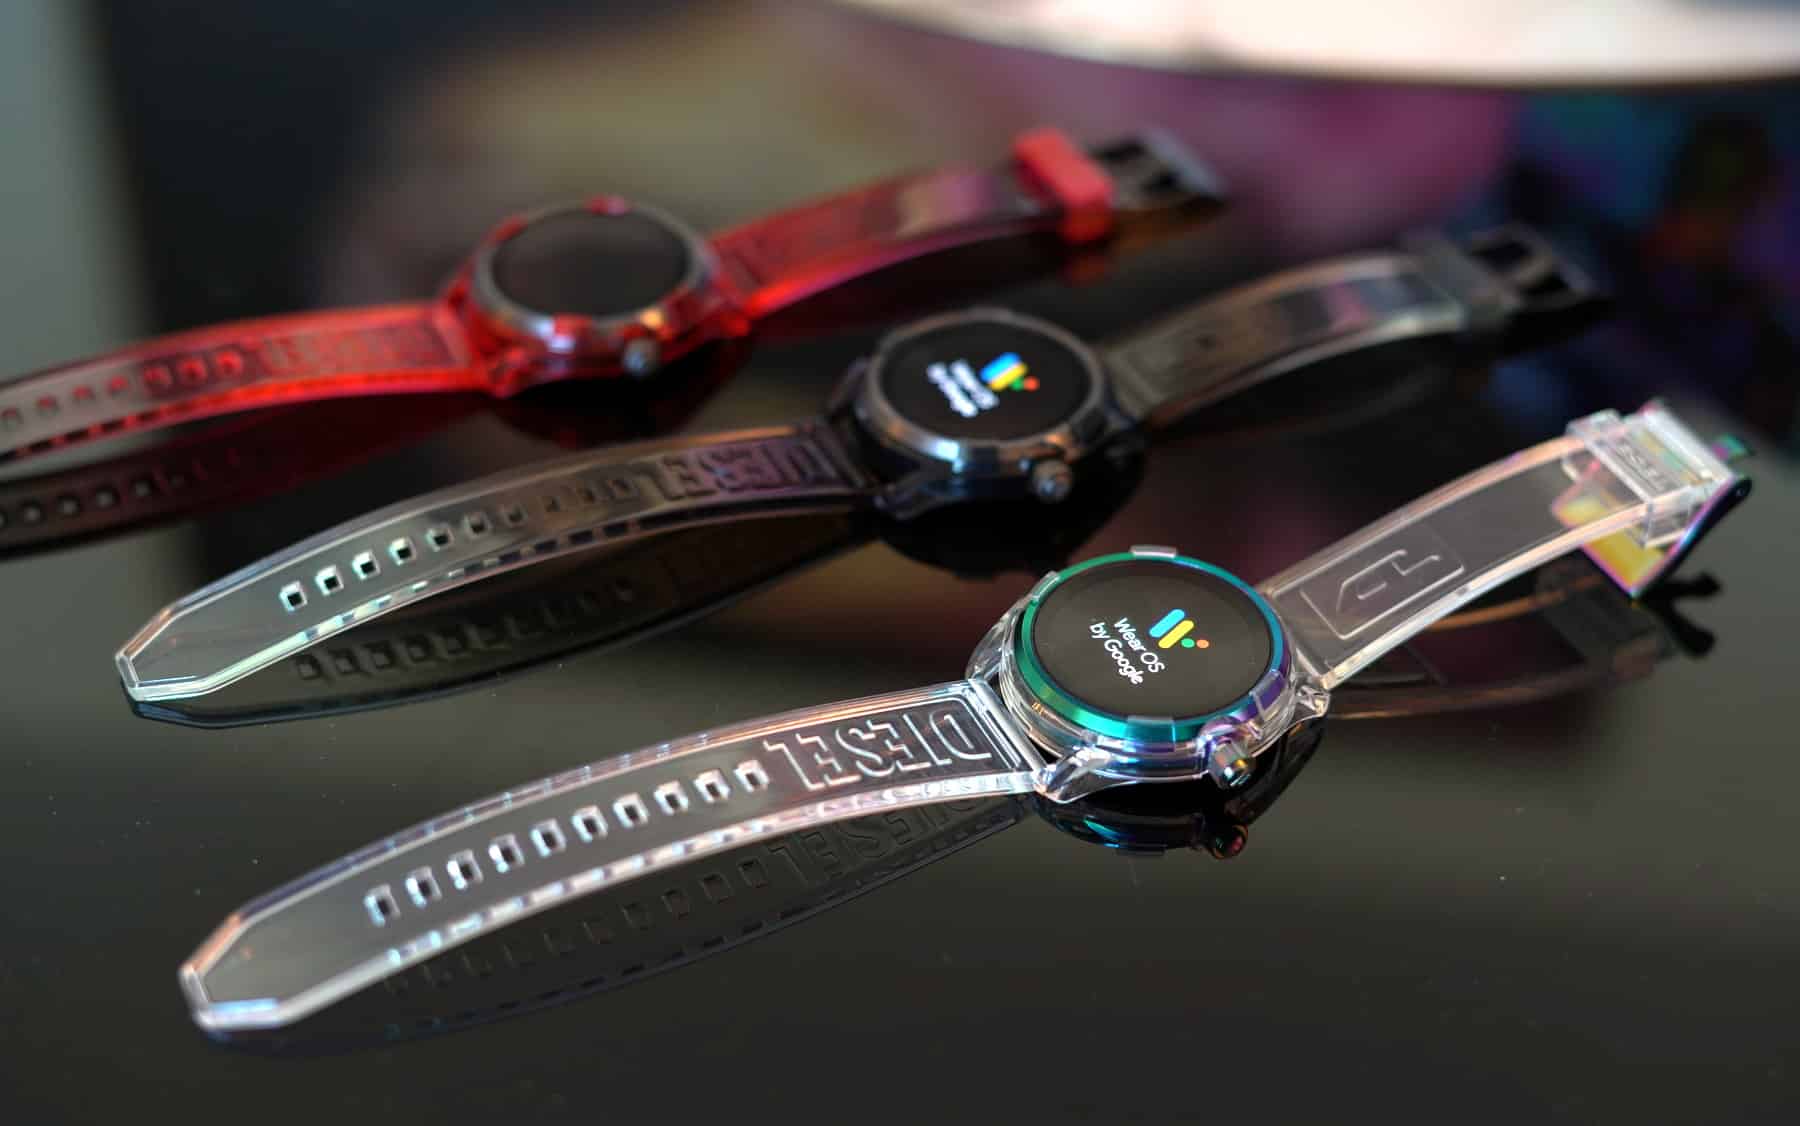 Diesel Fadelite Smartwatch: beauty with technology makes an excellent addition to your holiday gifting list